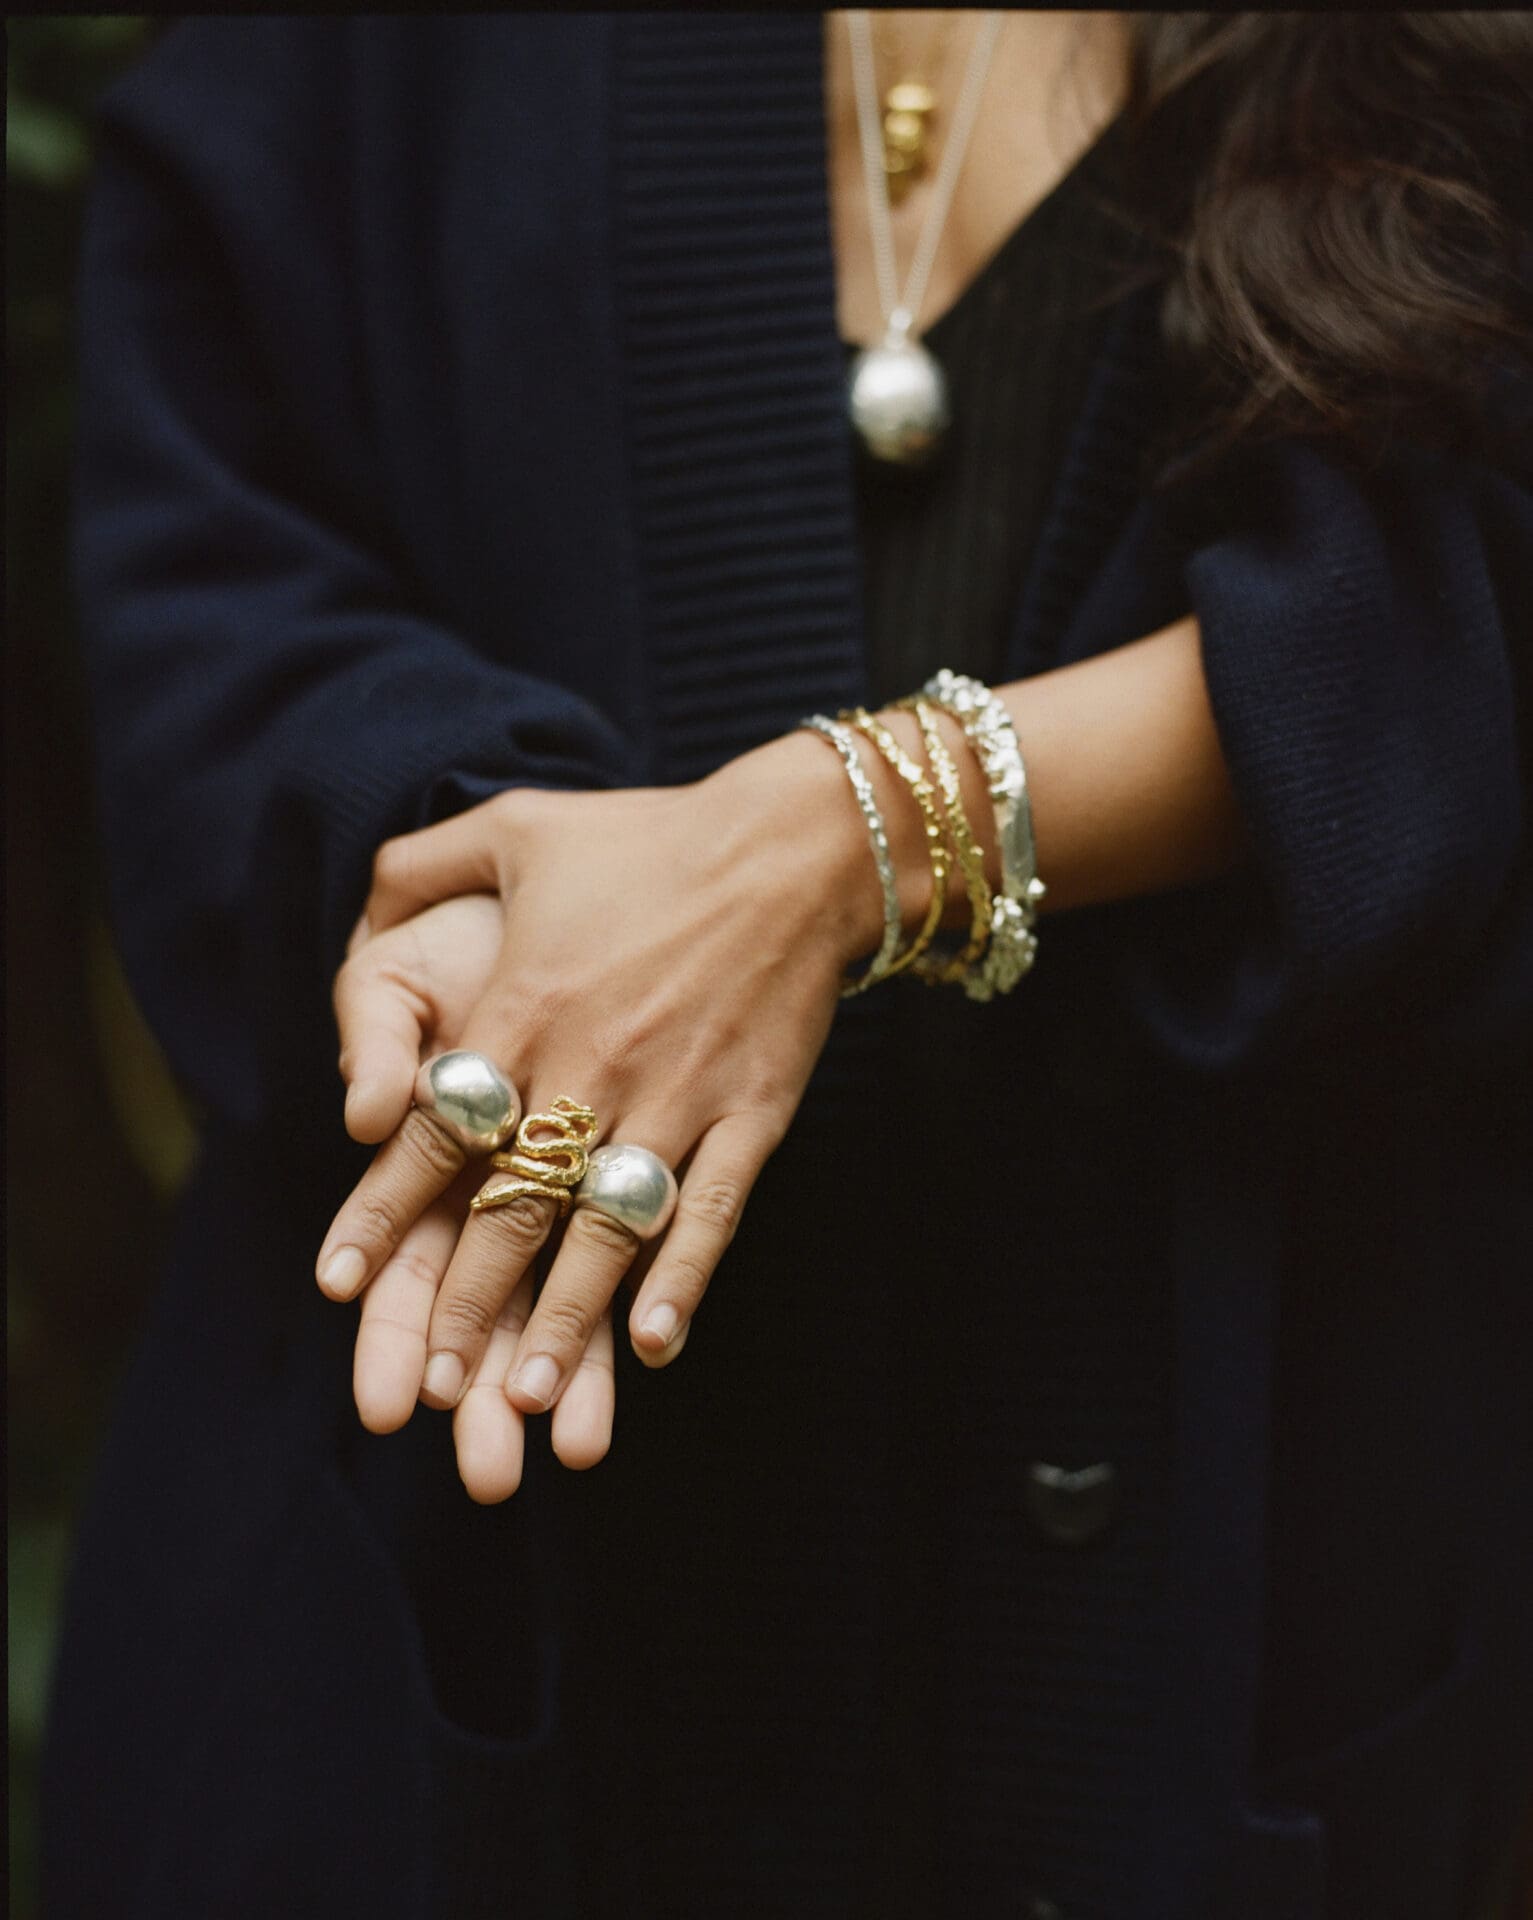 Rosh Mahtani, Alighieri | Rosh wearing a black top, clasping her hands with lots of Alighieri jewellery